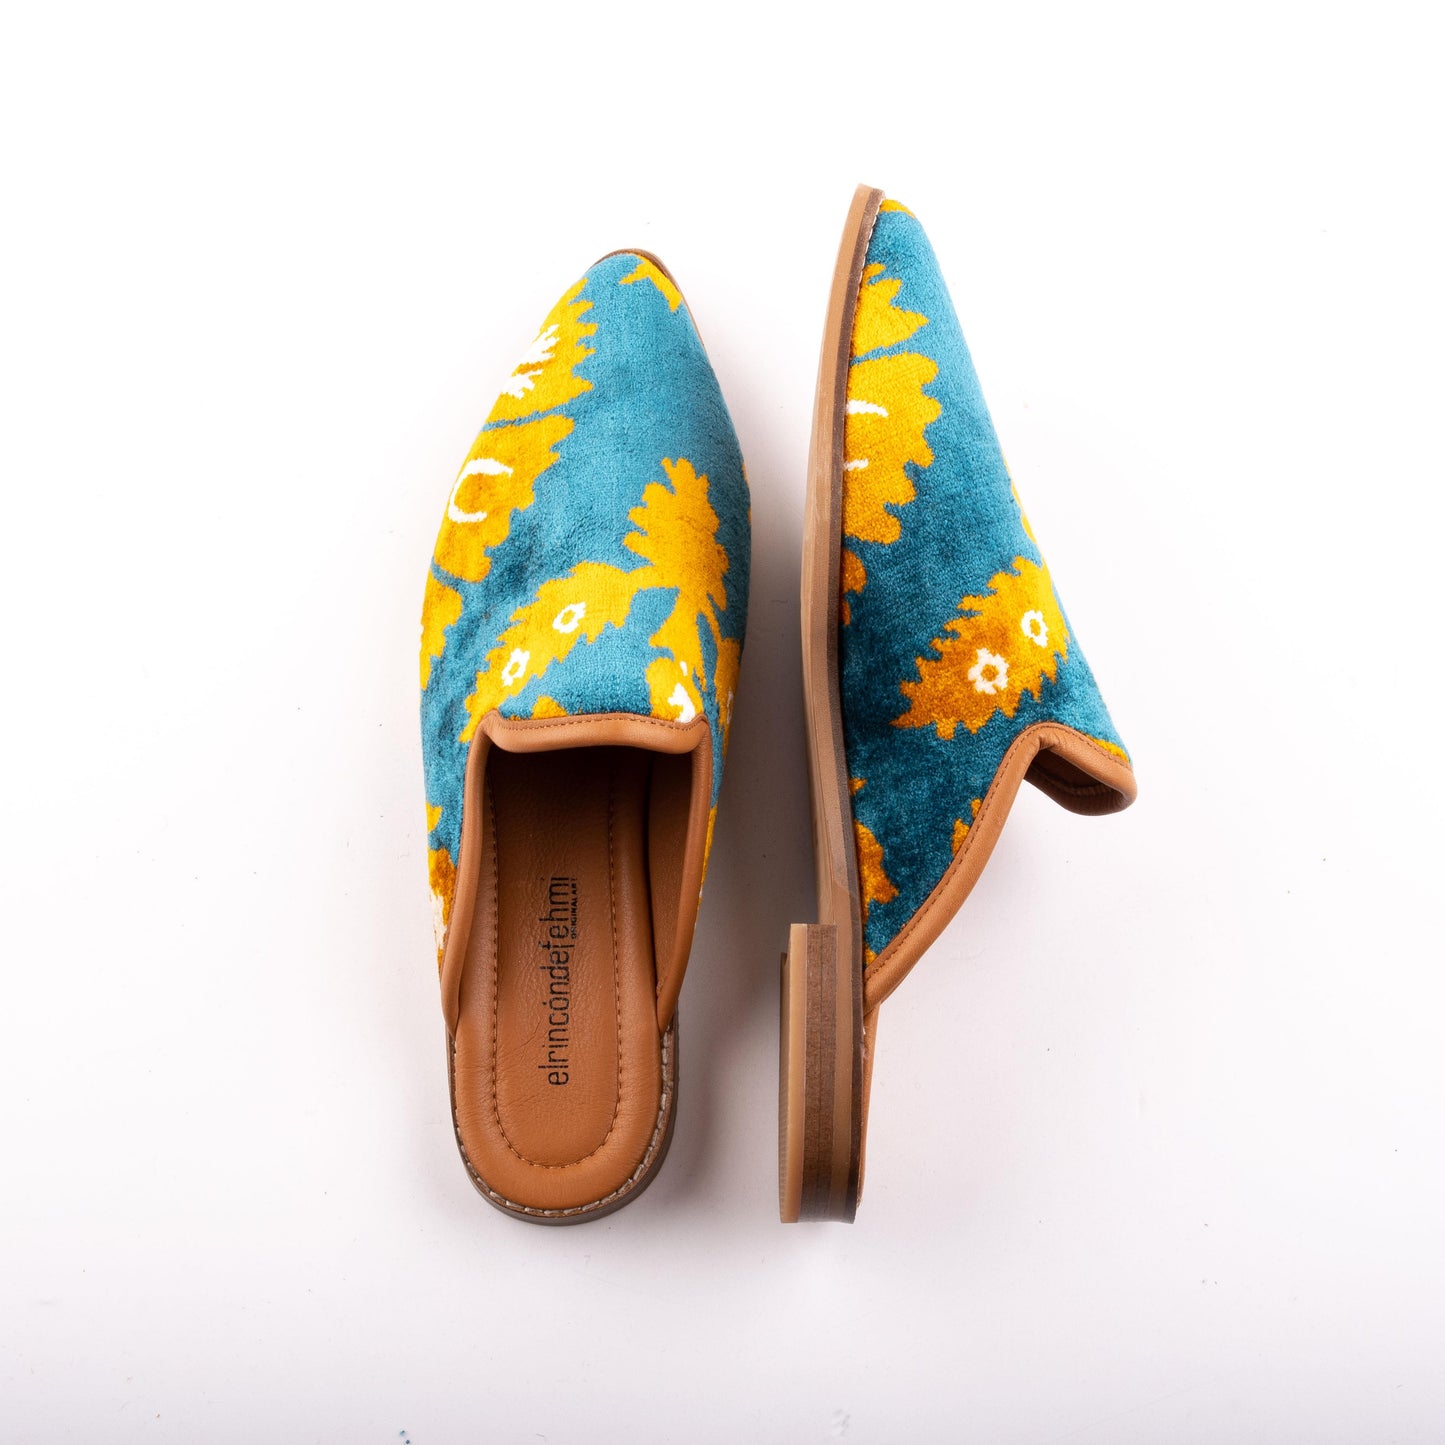 Ethnic Woman Pointed Toe Slipper Crafted From Handmade Velvet and Real Leather Size 11.5  Base Width: 9 cm - Base Length: 29 cm - Heel:  1.5 cm